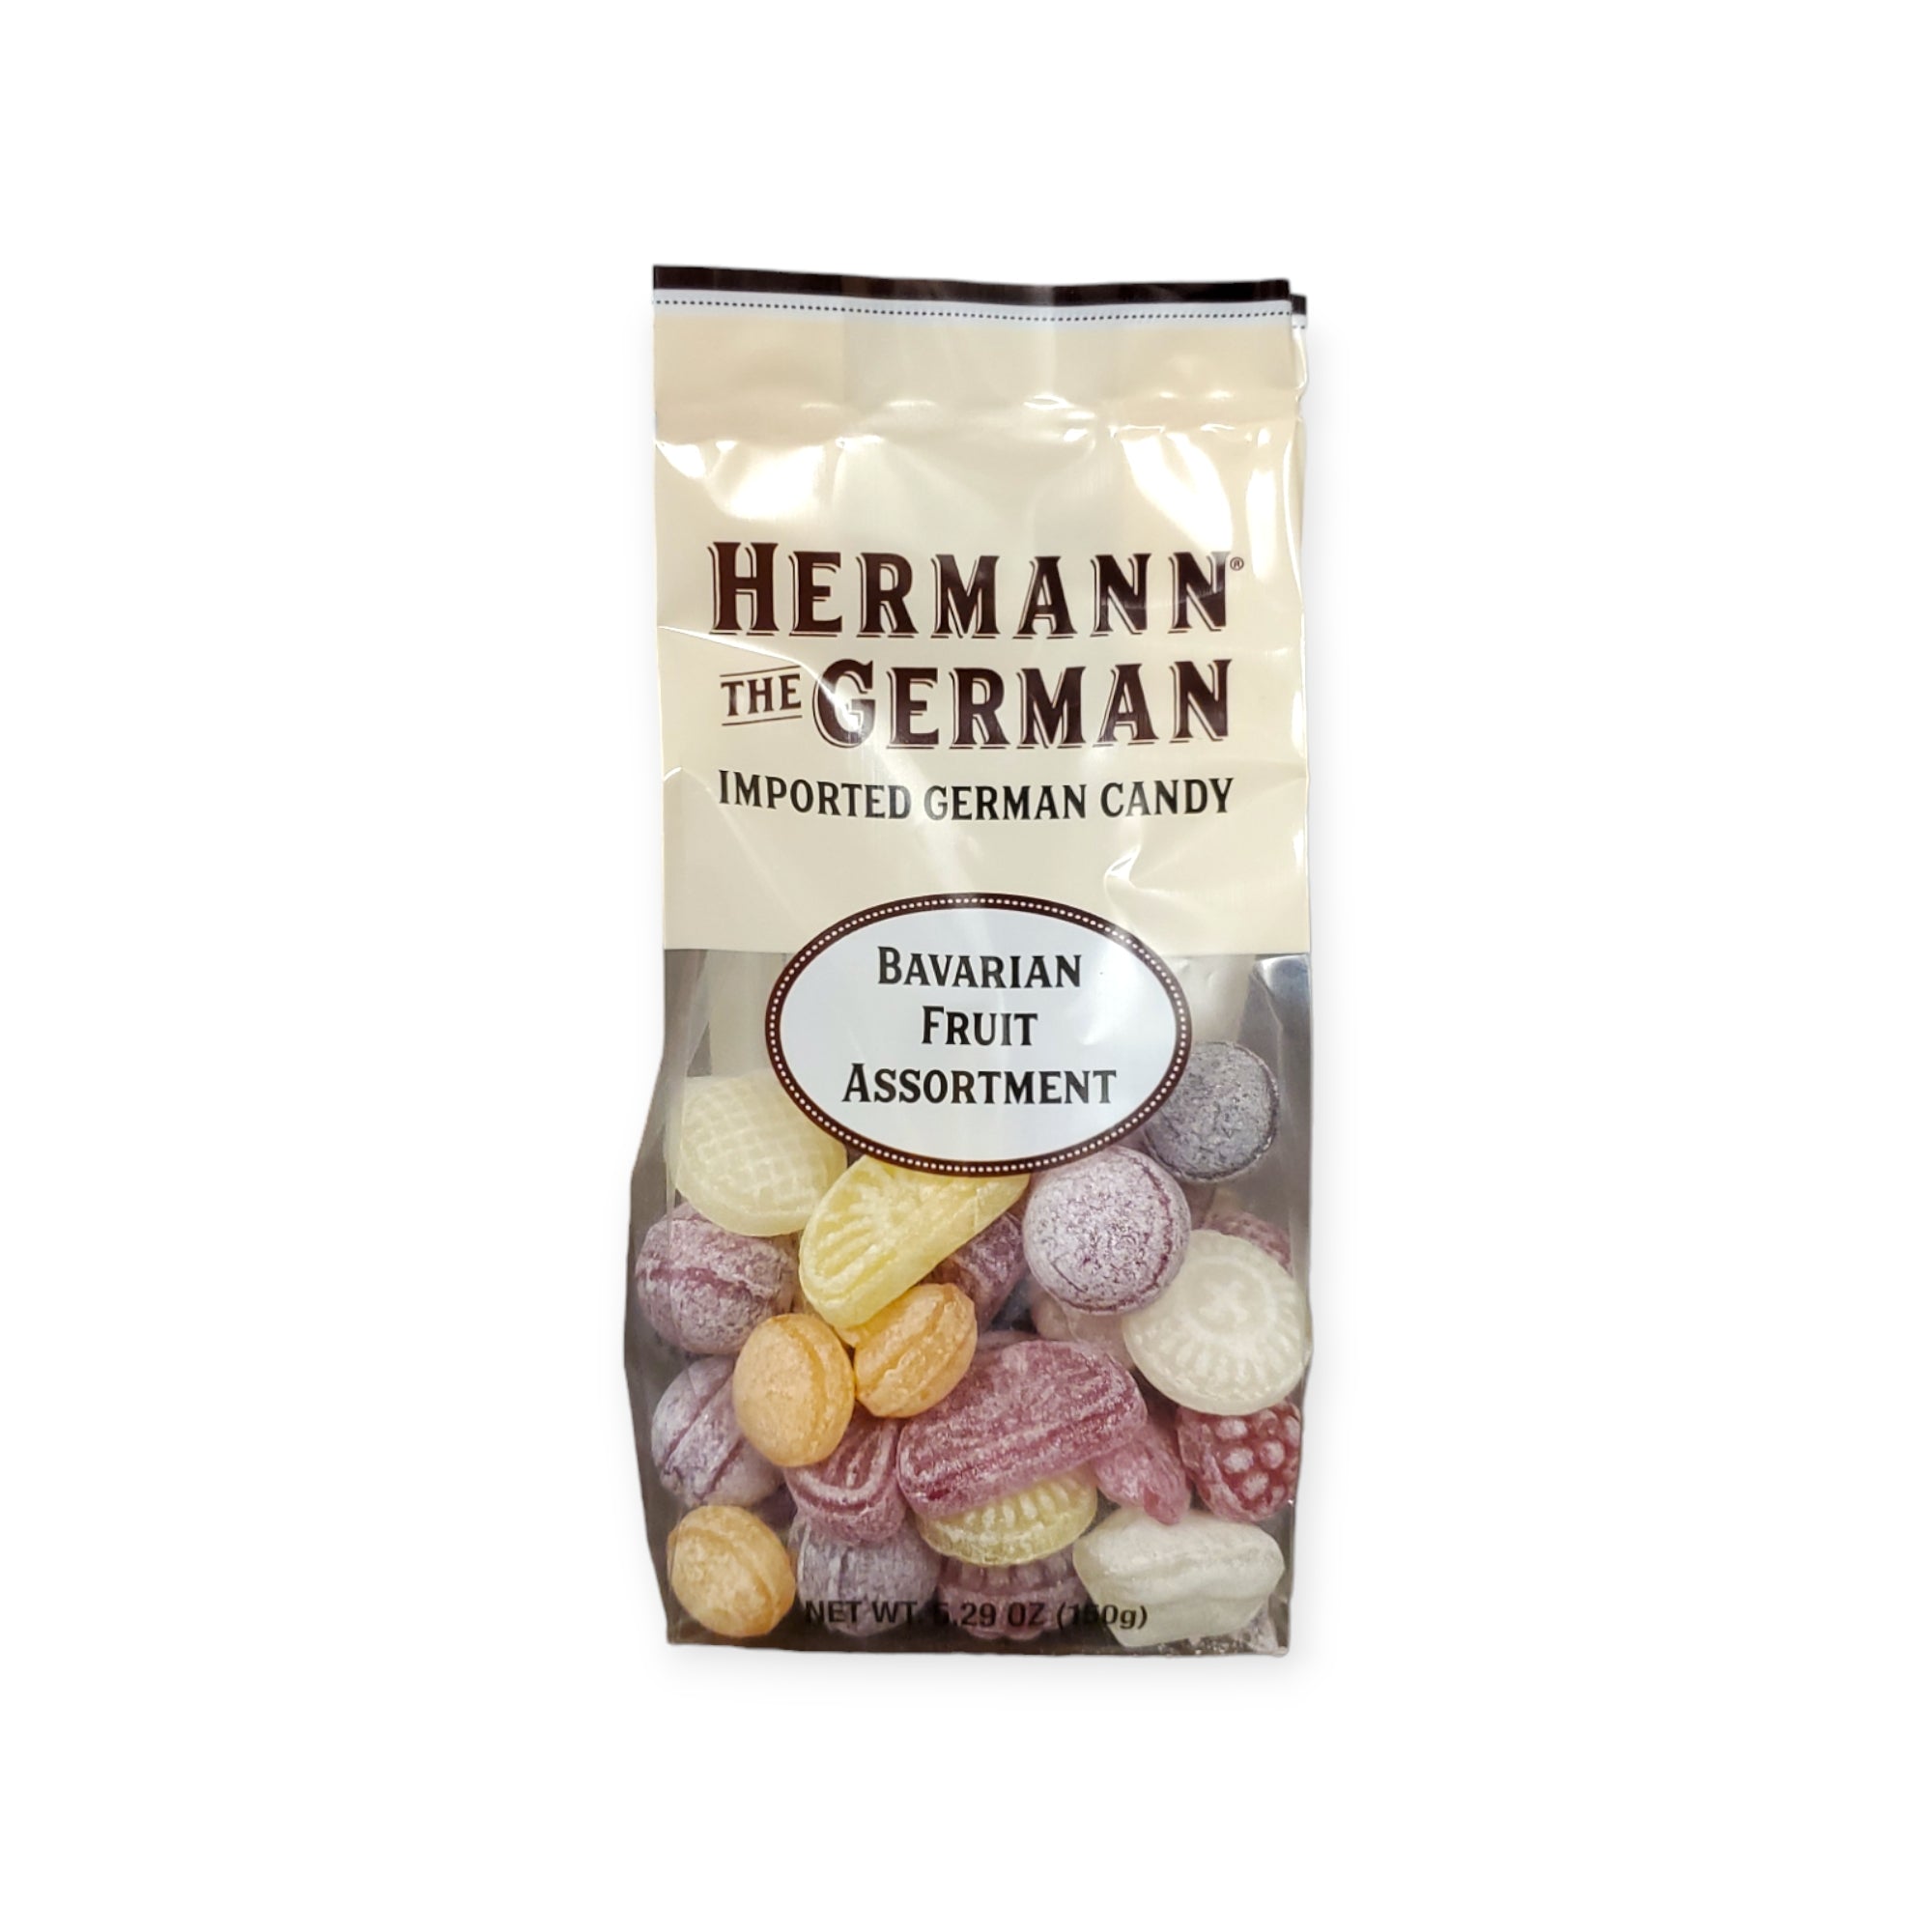 Candy: Bavarian Fruit Assortment Hermann the German Imported German Candy